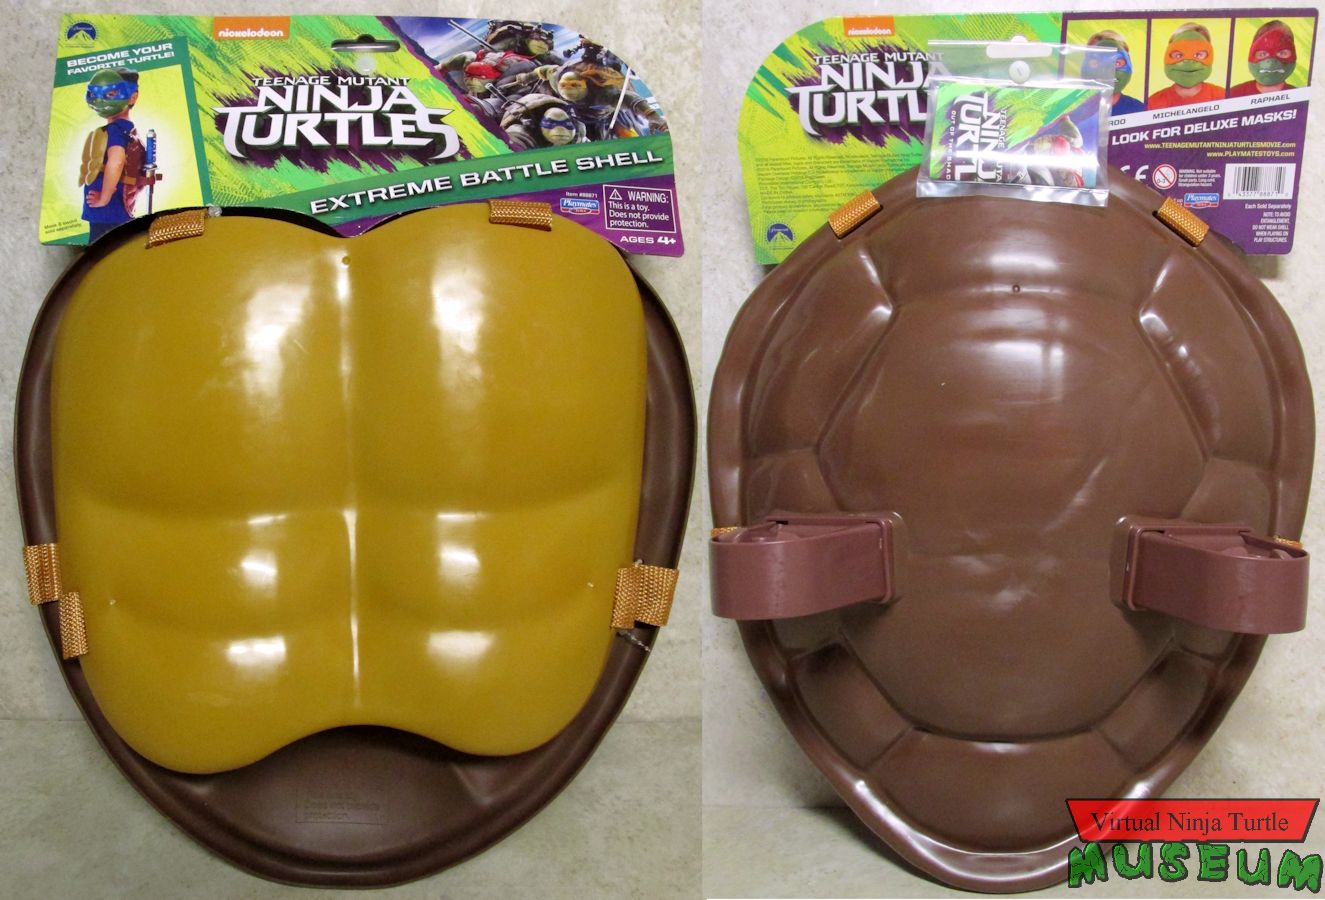 Extreme Battle Shell front and back